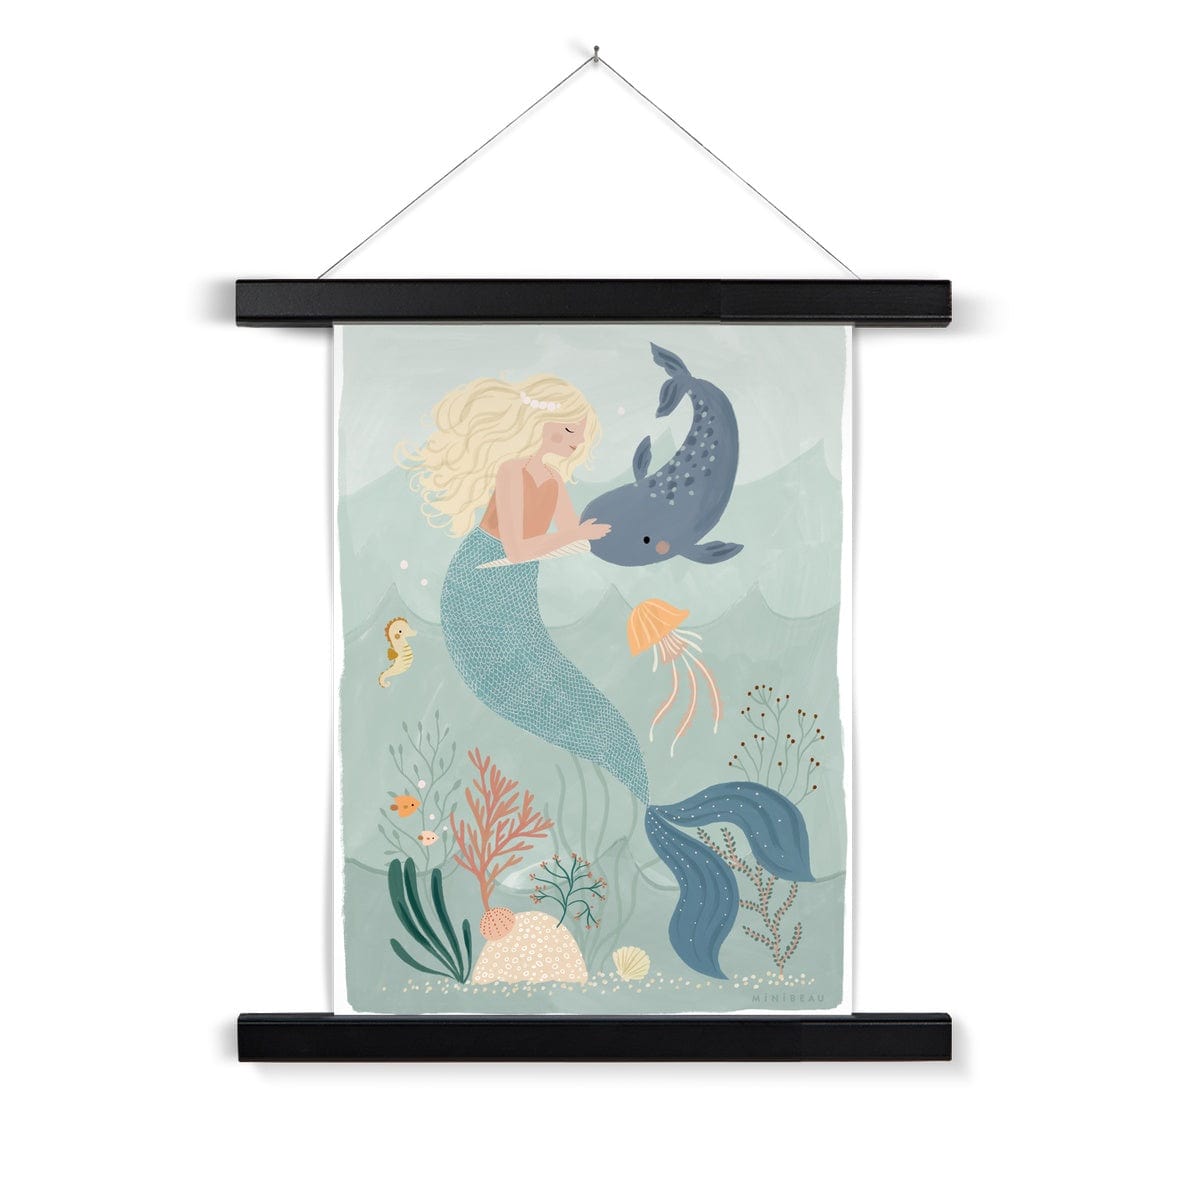 Picture of a hand-painted picture depicting Coral the Mermaid petting a Narwhal at the bottom of the sea. Coral is blonde and wearing an orange top and her tail is a deep teal. She is wearing a pearl headband. In the background are 2 small angel fish, a sea horse and a jellyfish amongst sea foliage with a white border, in a black wooden hanger, hanging from a nail